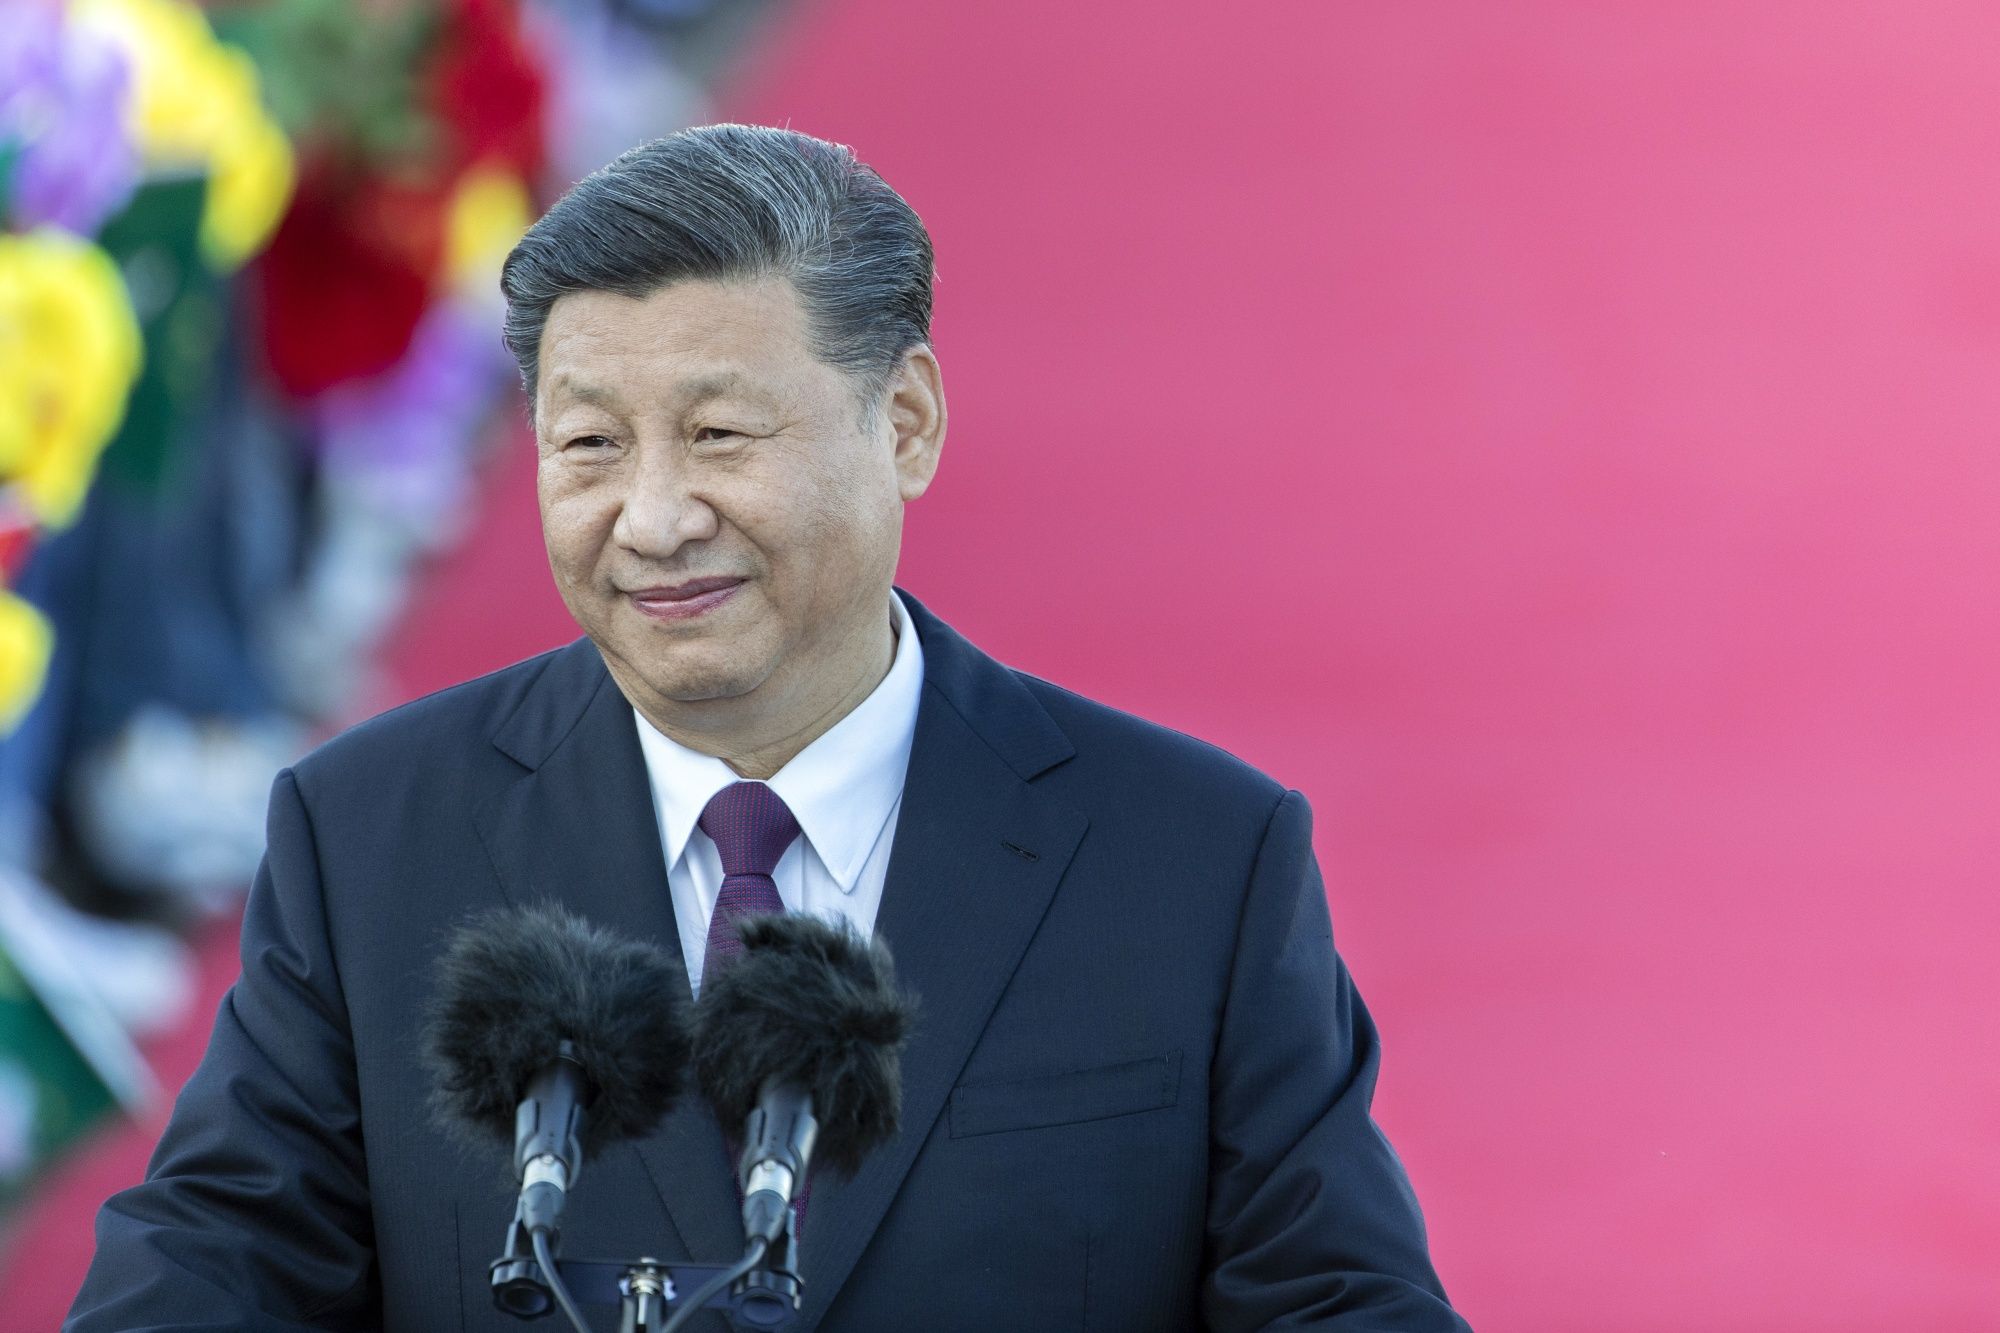 Xi Jinping, China's president, delivers a speech after arriving at Macau International Airport in Macau, China, on Wednesday, Dec. 18, 2019. President Xi is expected to use a visit marking 20 years of Chinese rule over Macau this week to send a message to the protest-stricken financial hub some 50 kilometers (30 miles) to the east: work with us and get rich.